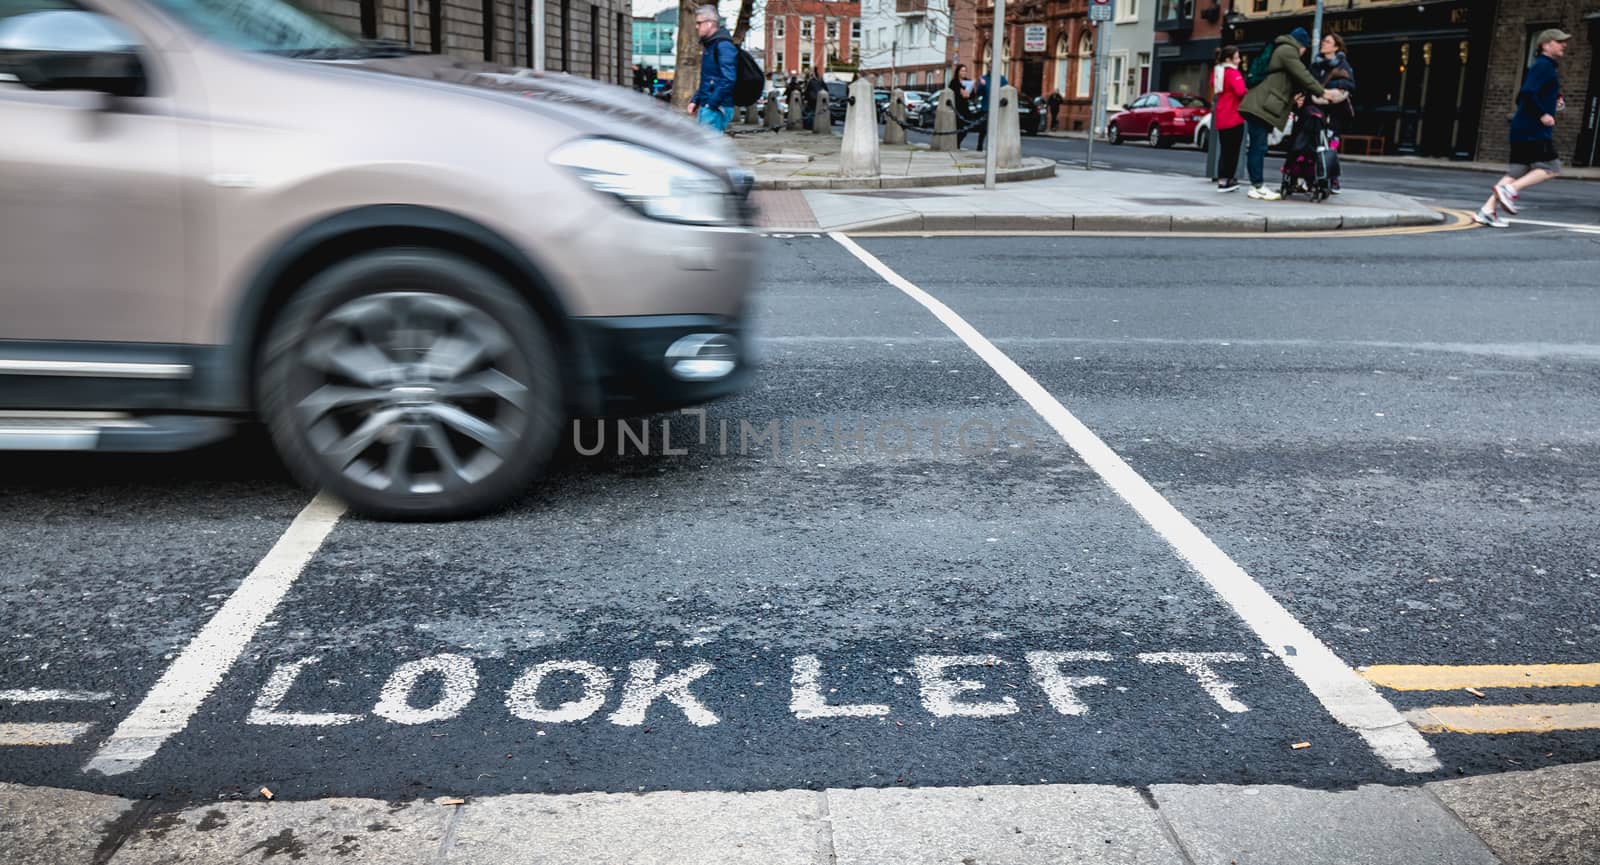 Look Left painted on the road on a pedestrian crossing in Dublin by AtlanticEUROSTOXX